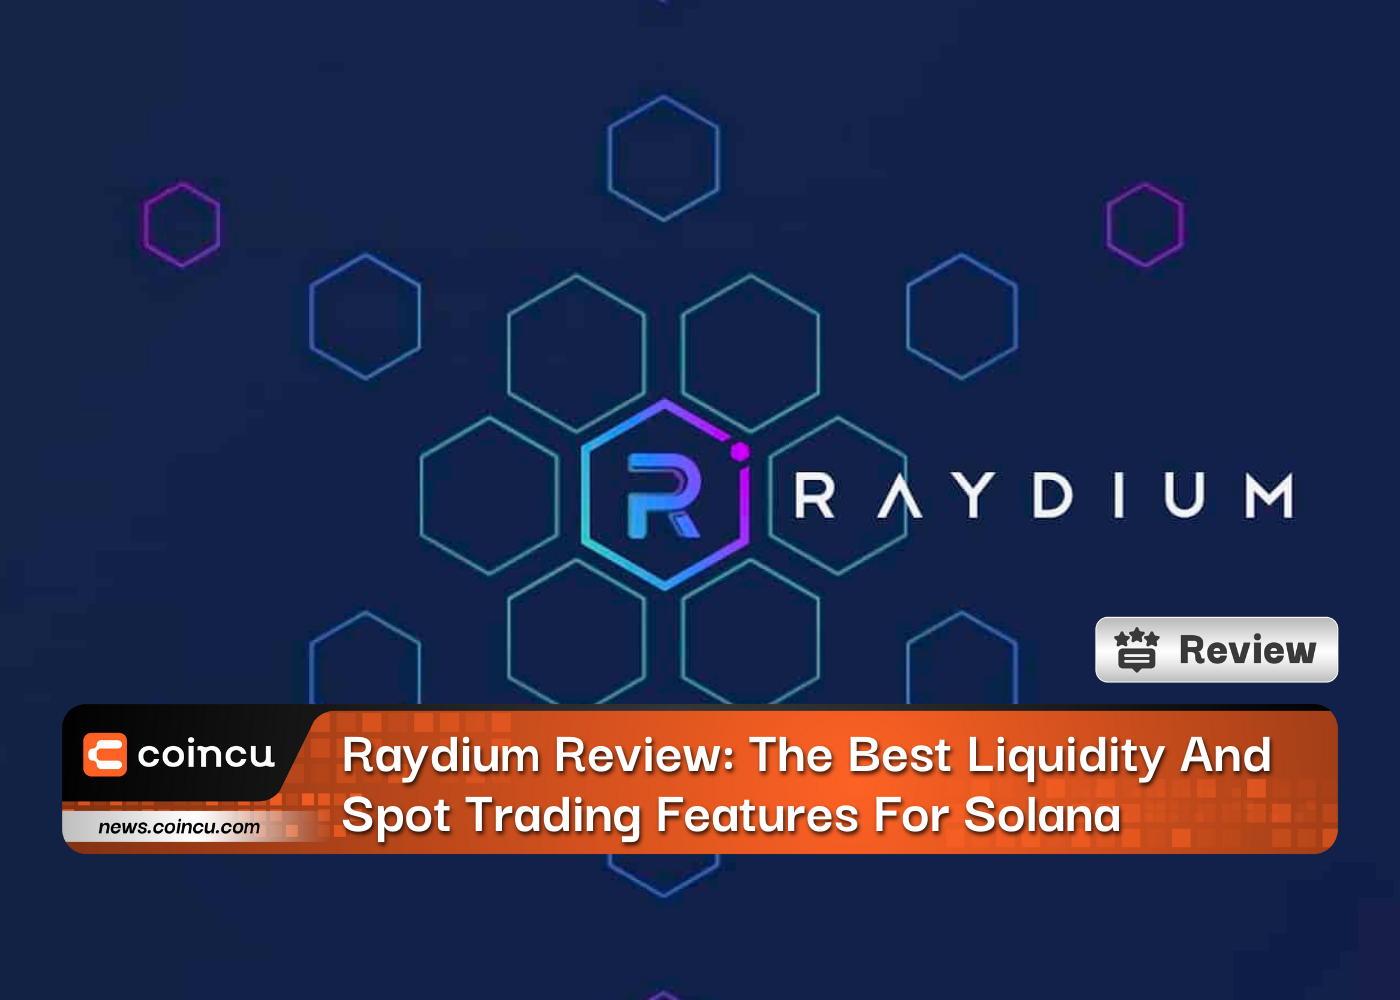 Raydium Review: The Best Liquidity And Spot Trading Features For Solana Ecosystem